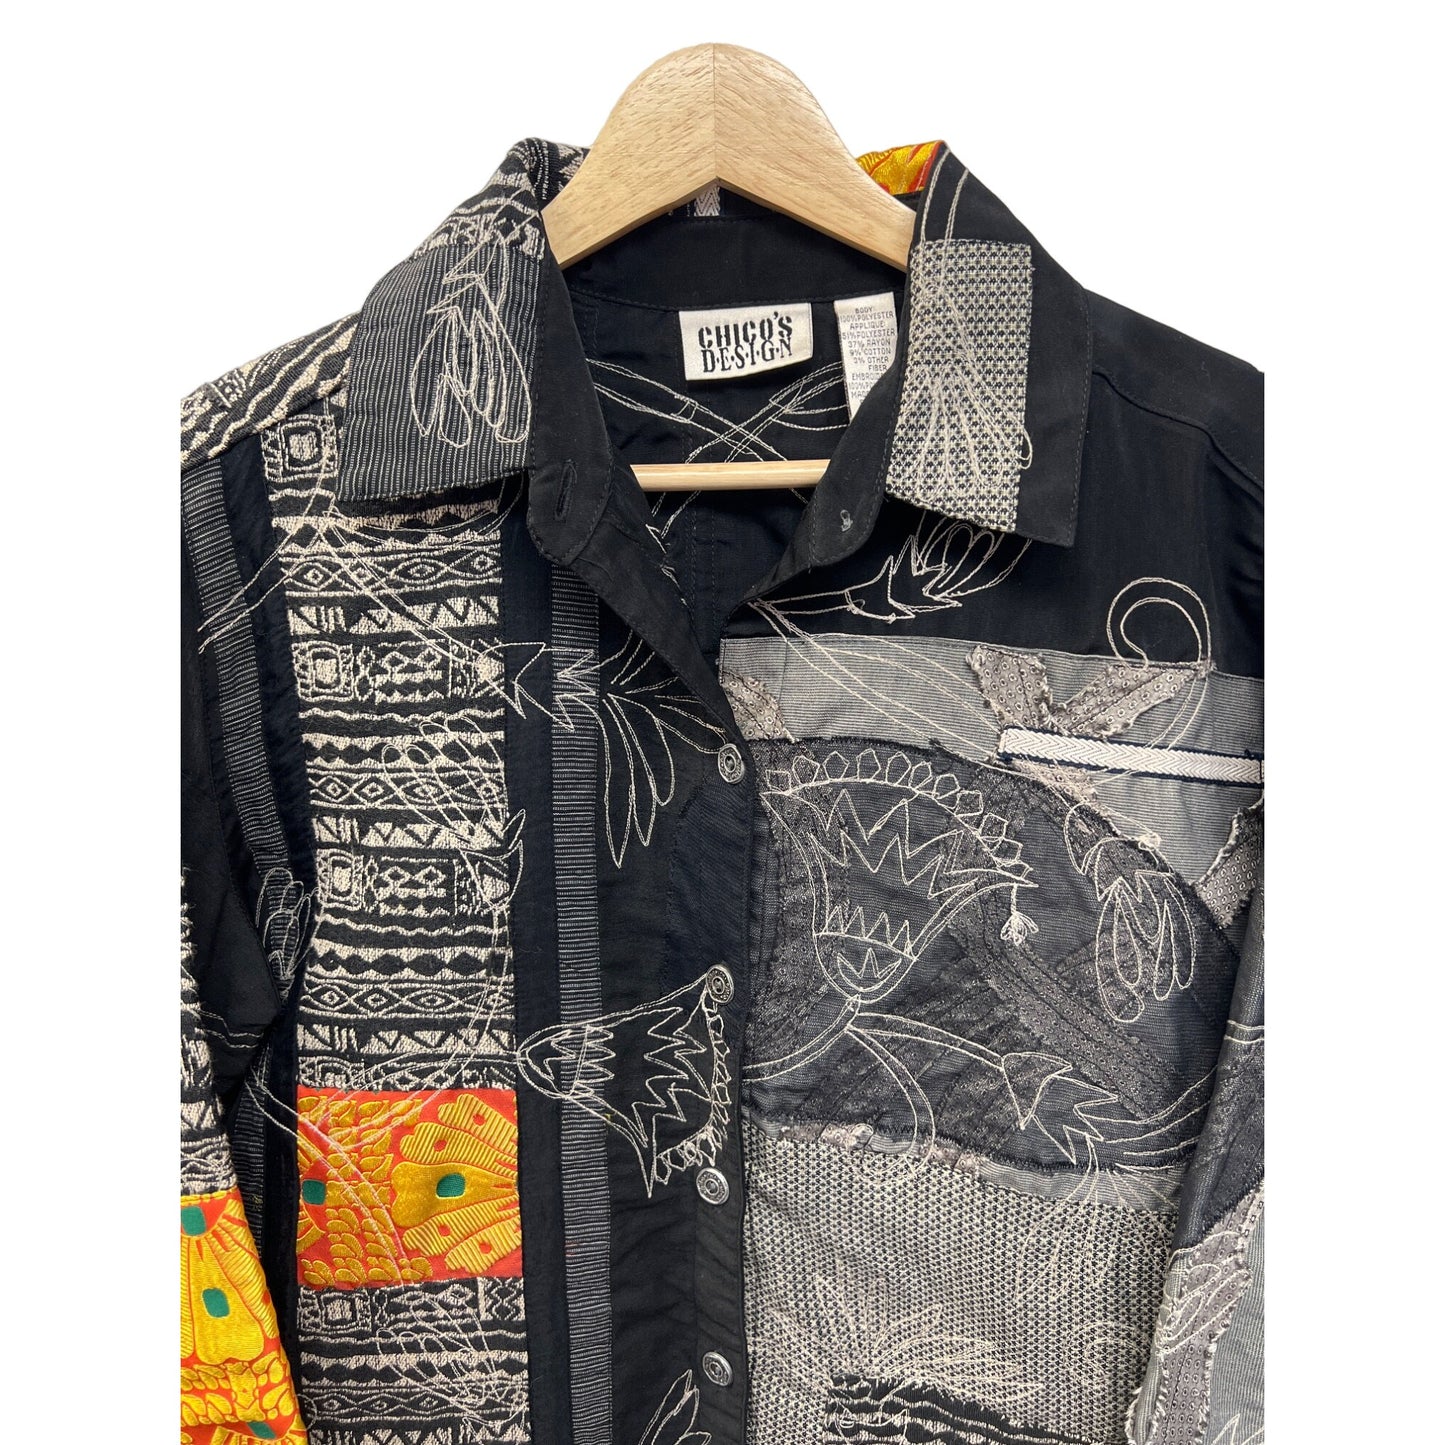 Chico's Design Vintage Embroidery Patchwork Tapestry Jacket